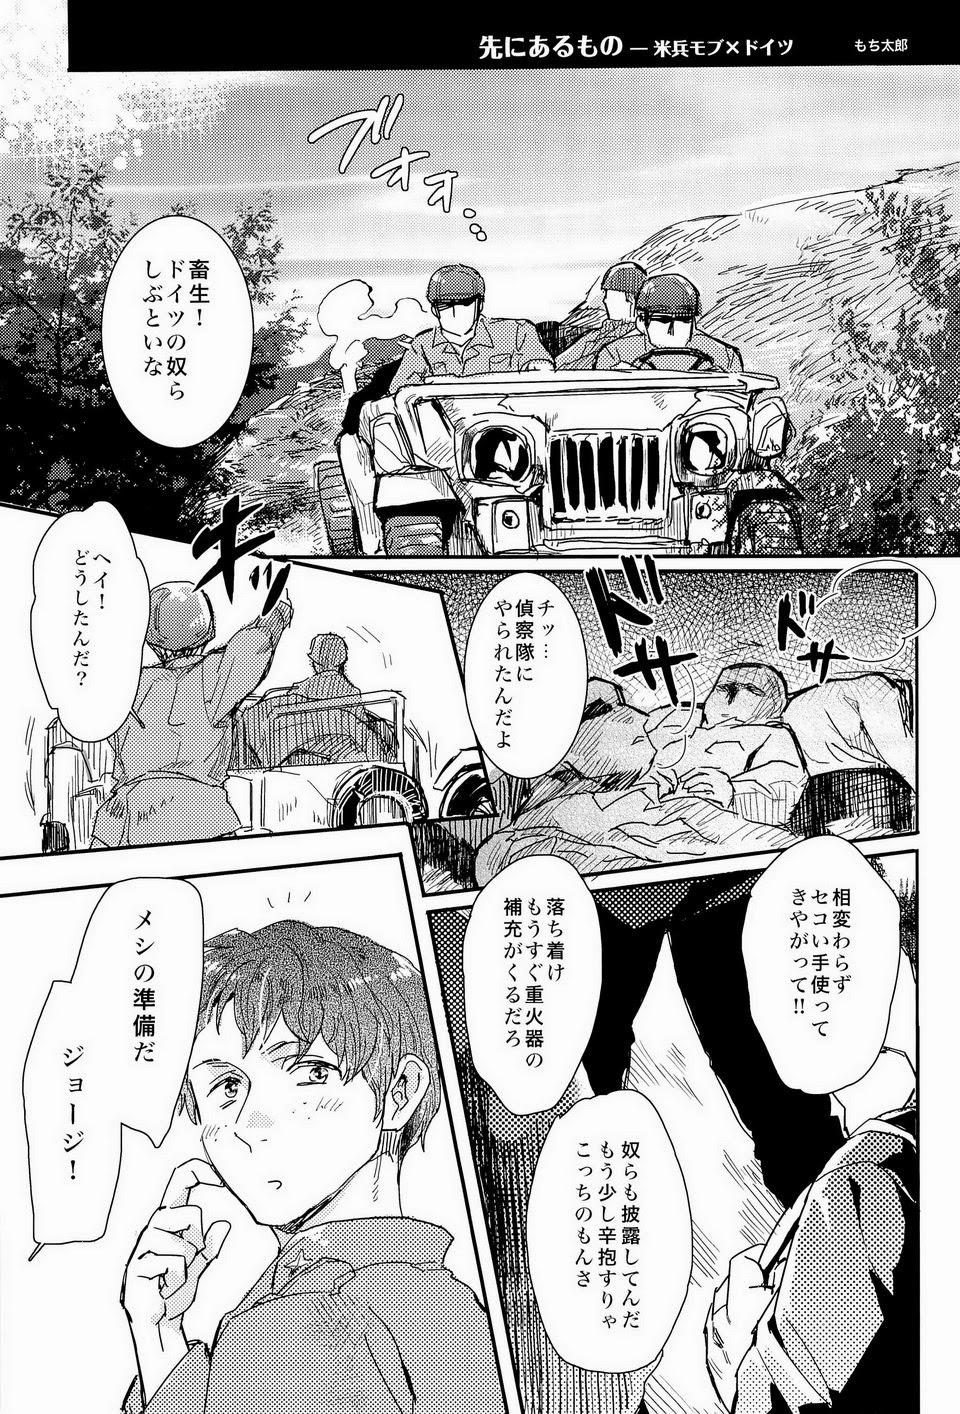 Oldyoung 細けぇことはいいんだよ - Axis powers hetalia Family - Page 5